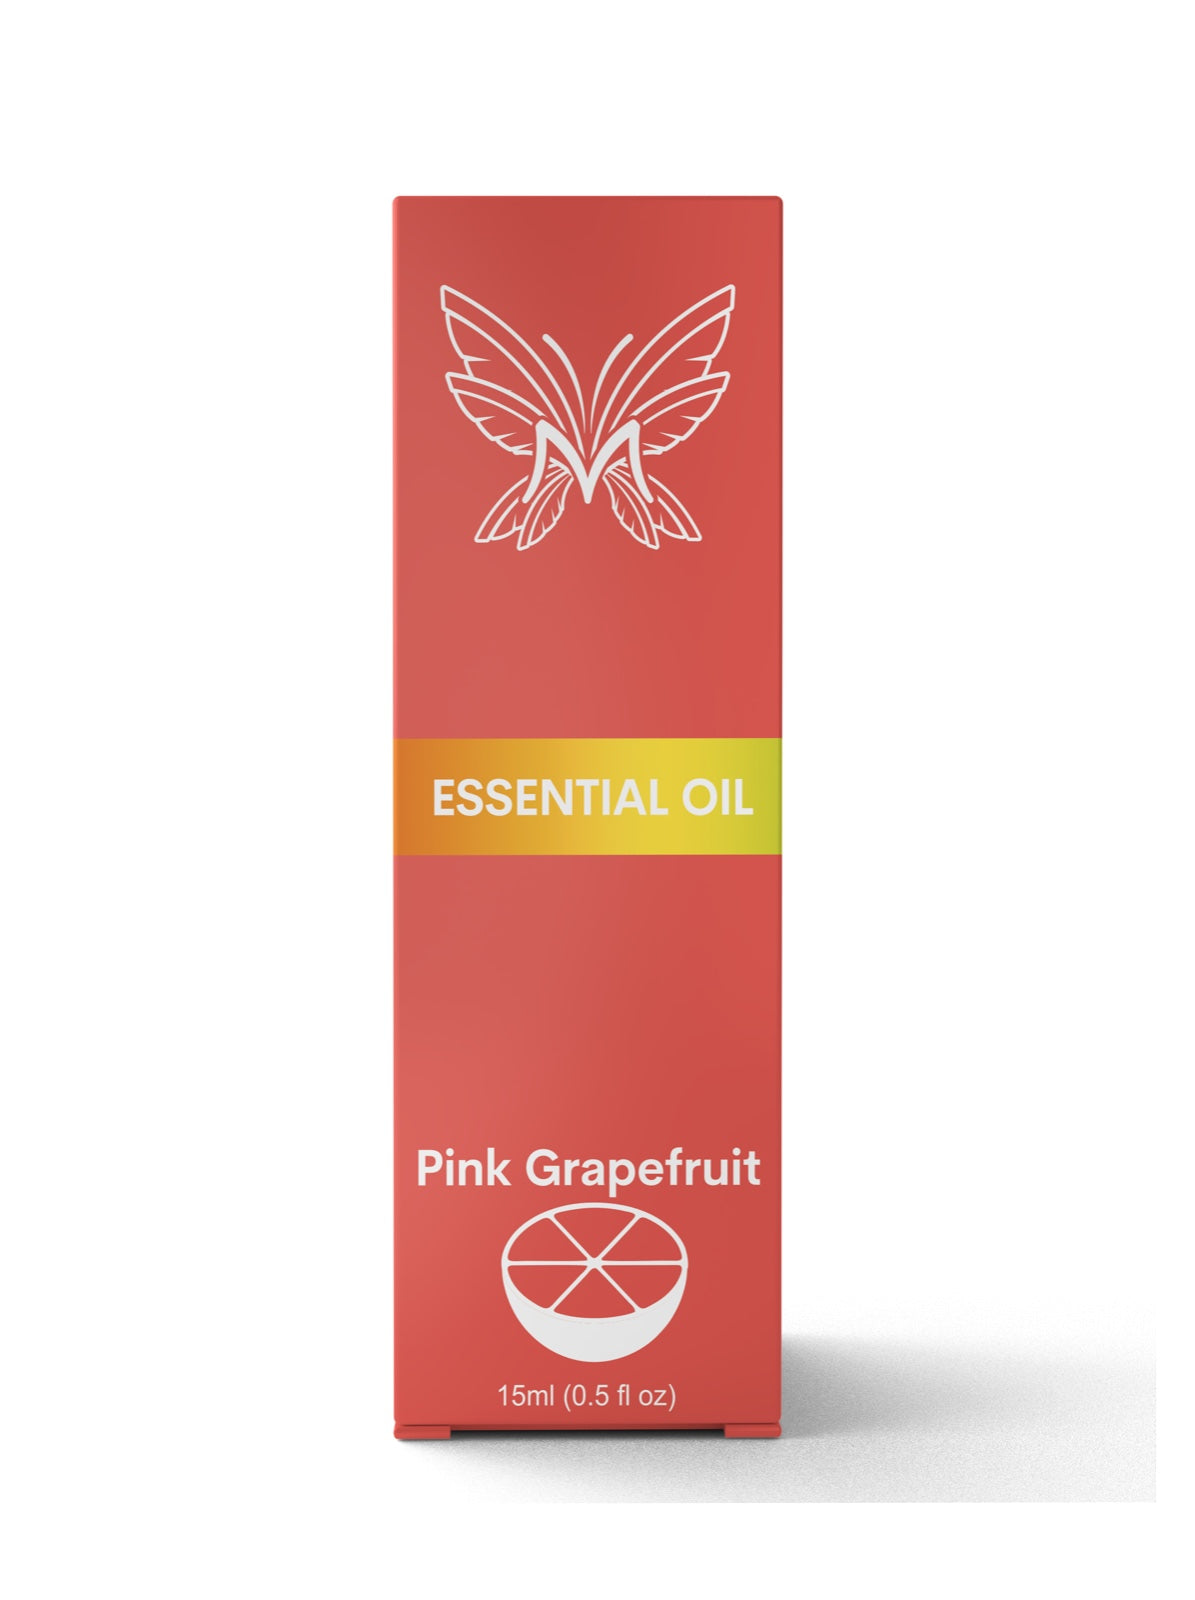 Pink Grapefruit Oil – Citrus Bliss Essential Oil – Energizing and Soothing Aromatherapy Pink Grapefruit Oil